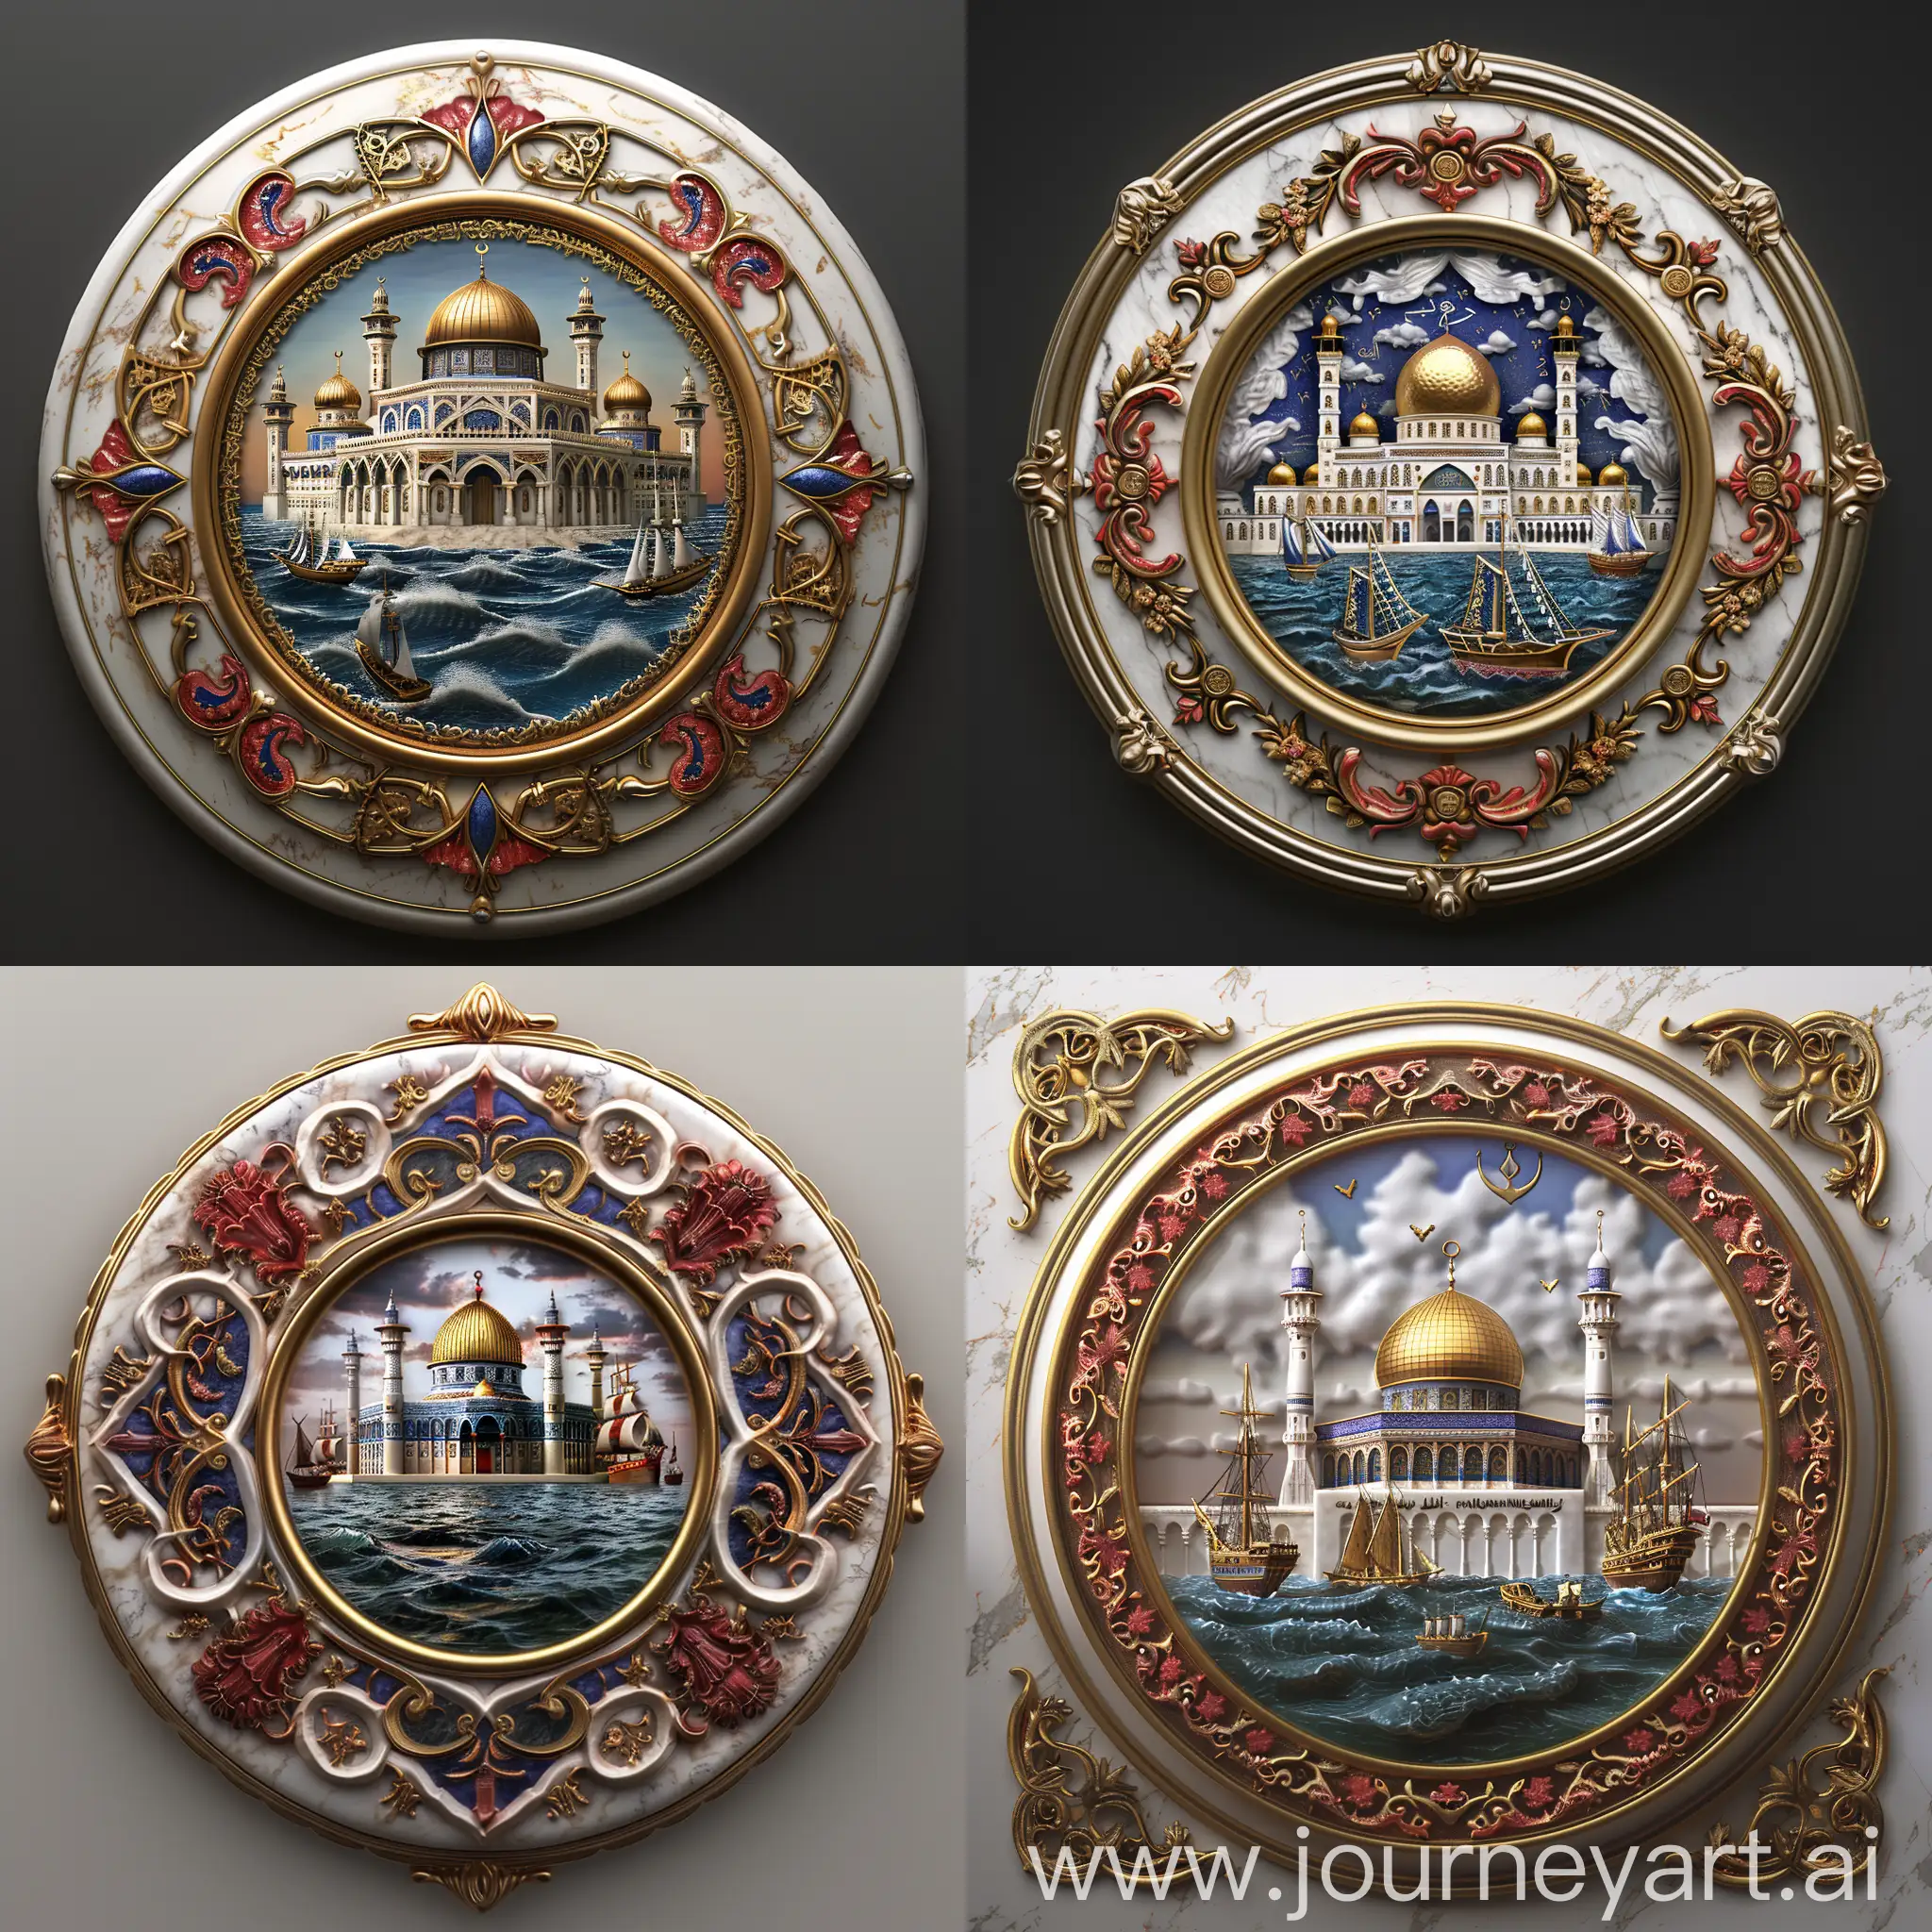 a Round white marbled porclain medallion, depicting al aqsa mosque beyond sea with ships, Symmetric front perspective, solid red blue islamic floral design and golden arabesque embossed on white marbled border, shiny gold framed, 3d --sref https://cdn.discordapp.com/attachments/1213041174428782623/1221545440881672252/image_9jnnmm.png?ex=662ea758&is=661c3258&hm=64547b1a711bc0e60d7bed72683f5b3f279c27c147cb59ae86a08f55b02a7243& --sw 1000